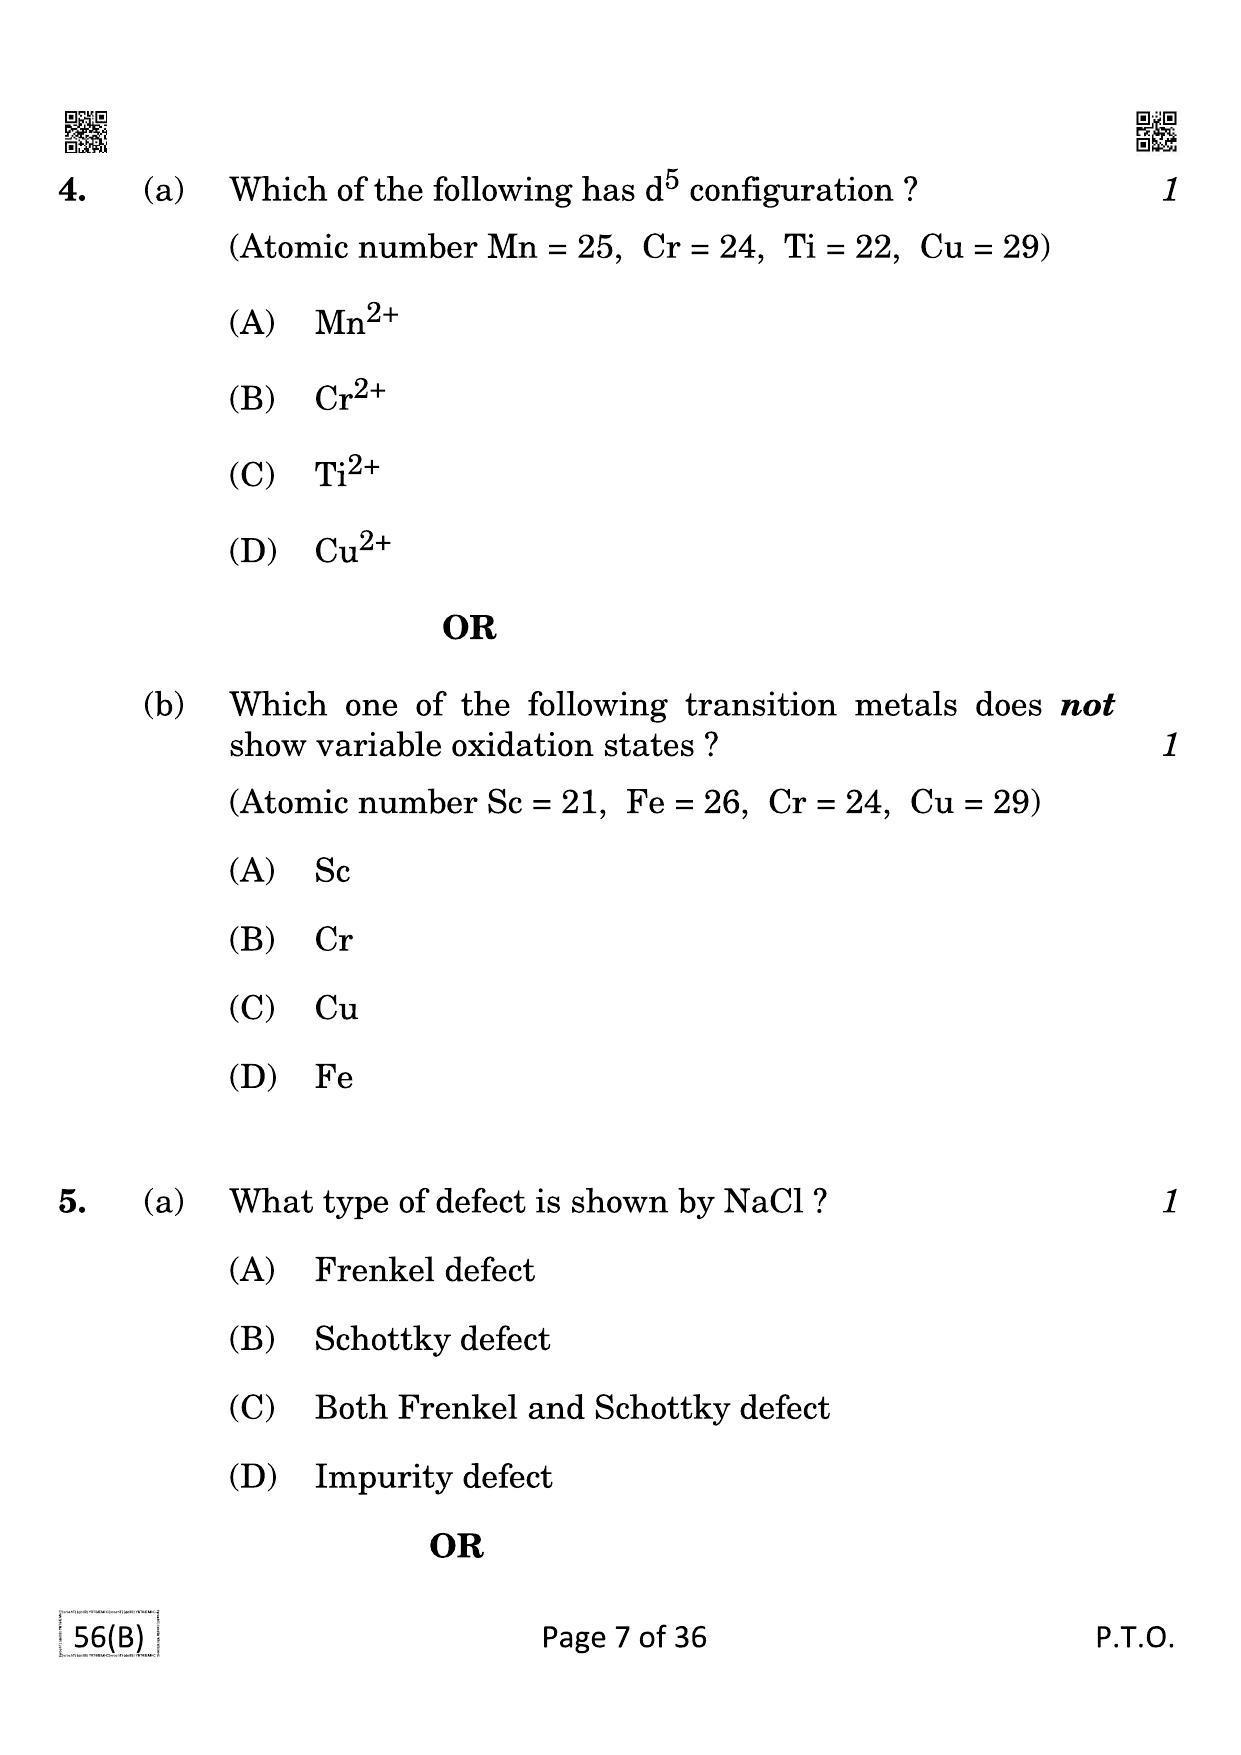 CBSE Class 12 QP_043_CHEMISTRY_FOR_BLIND_CANDIDATES 2021 Compartment Question Paper - Page 7